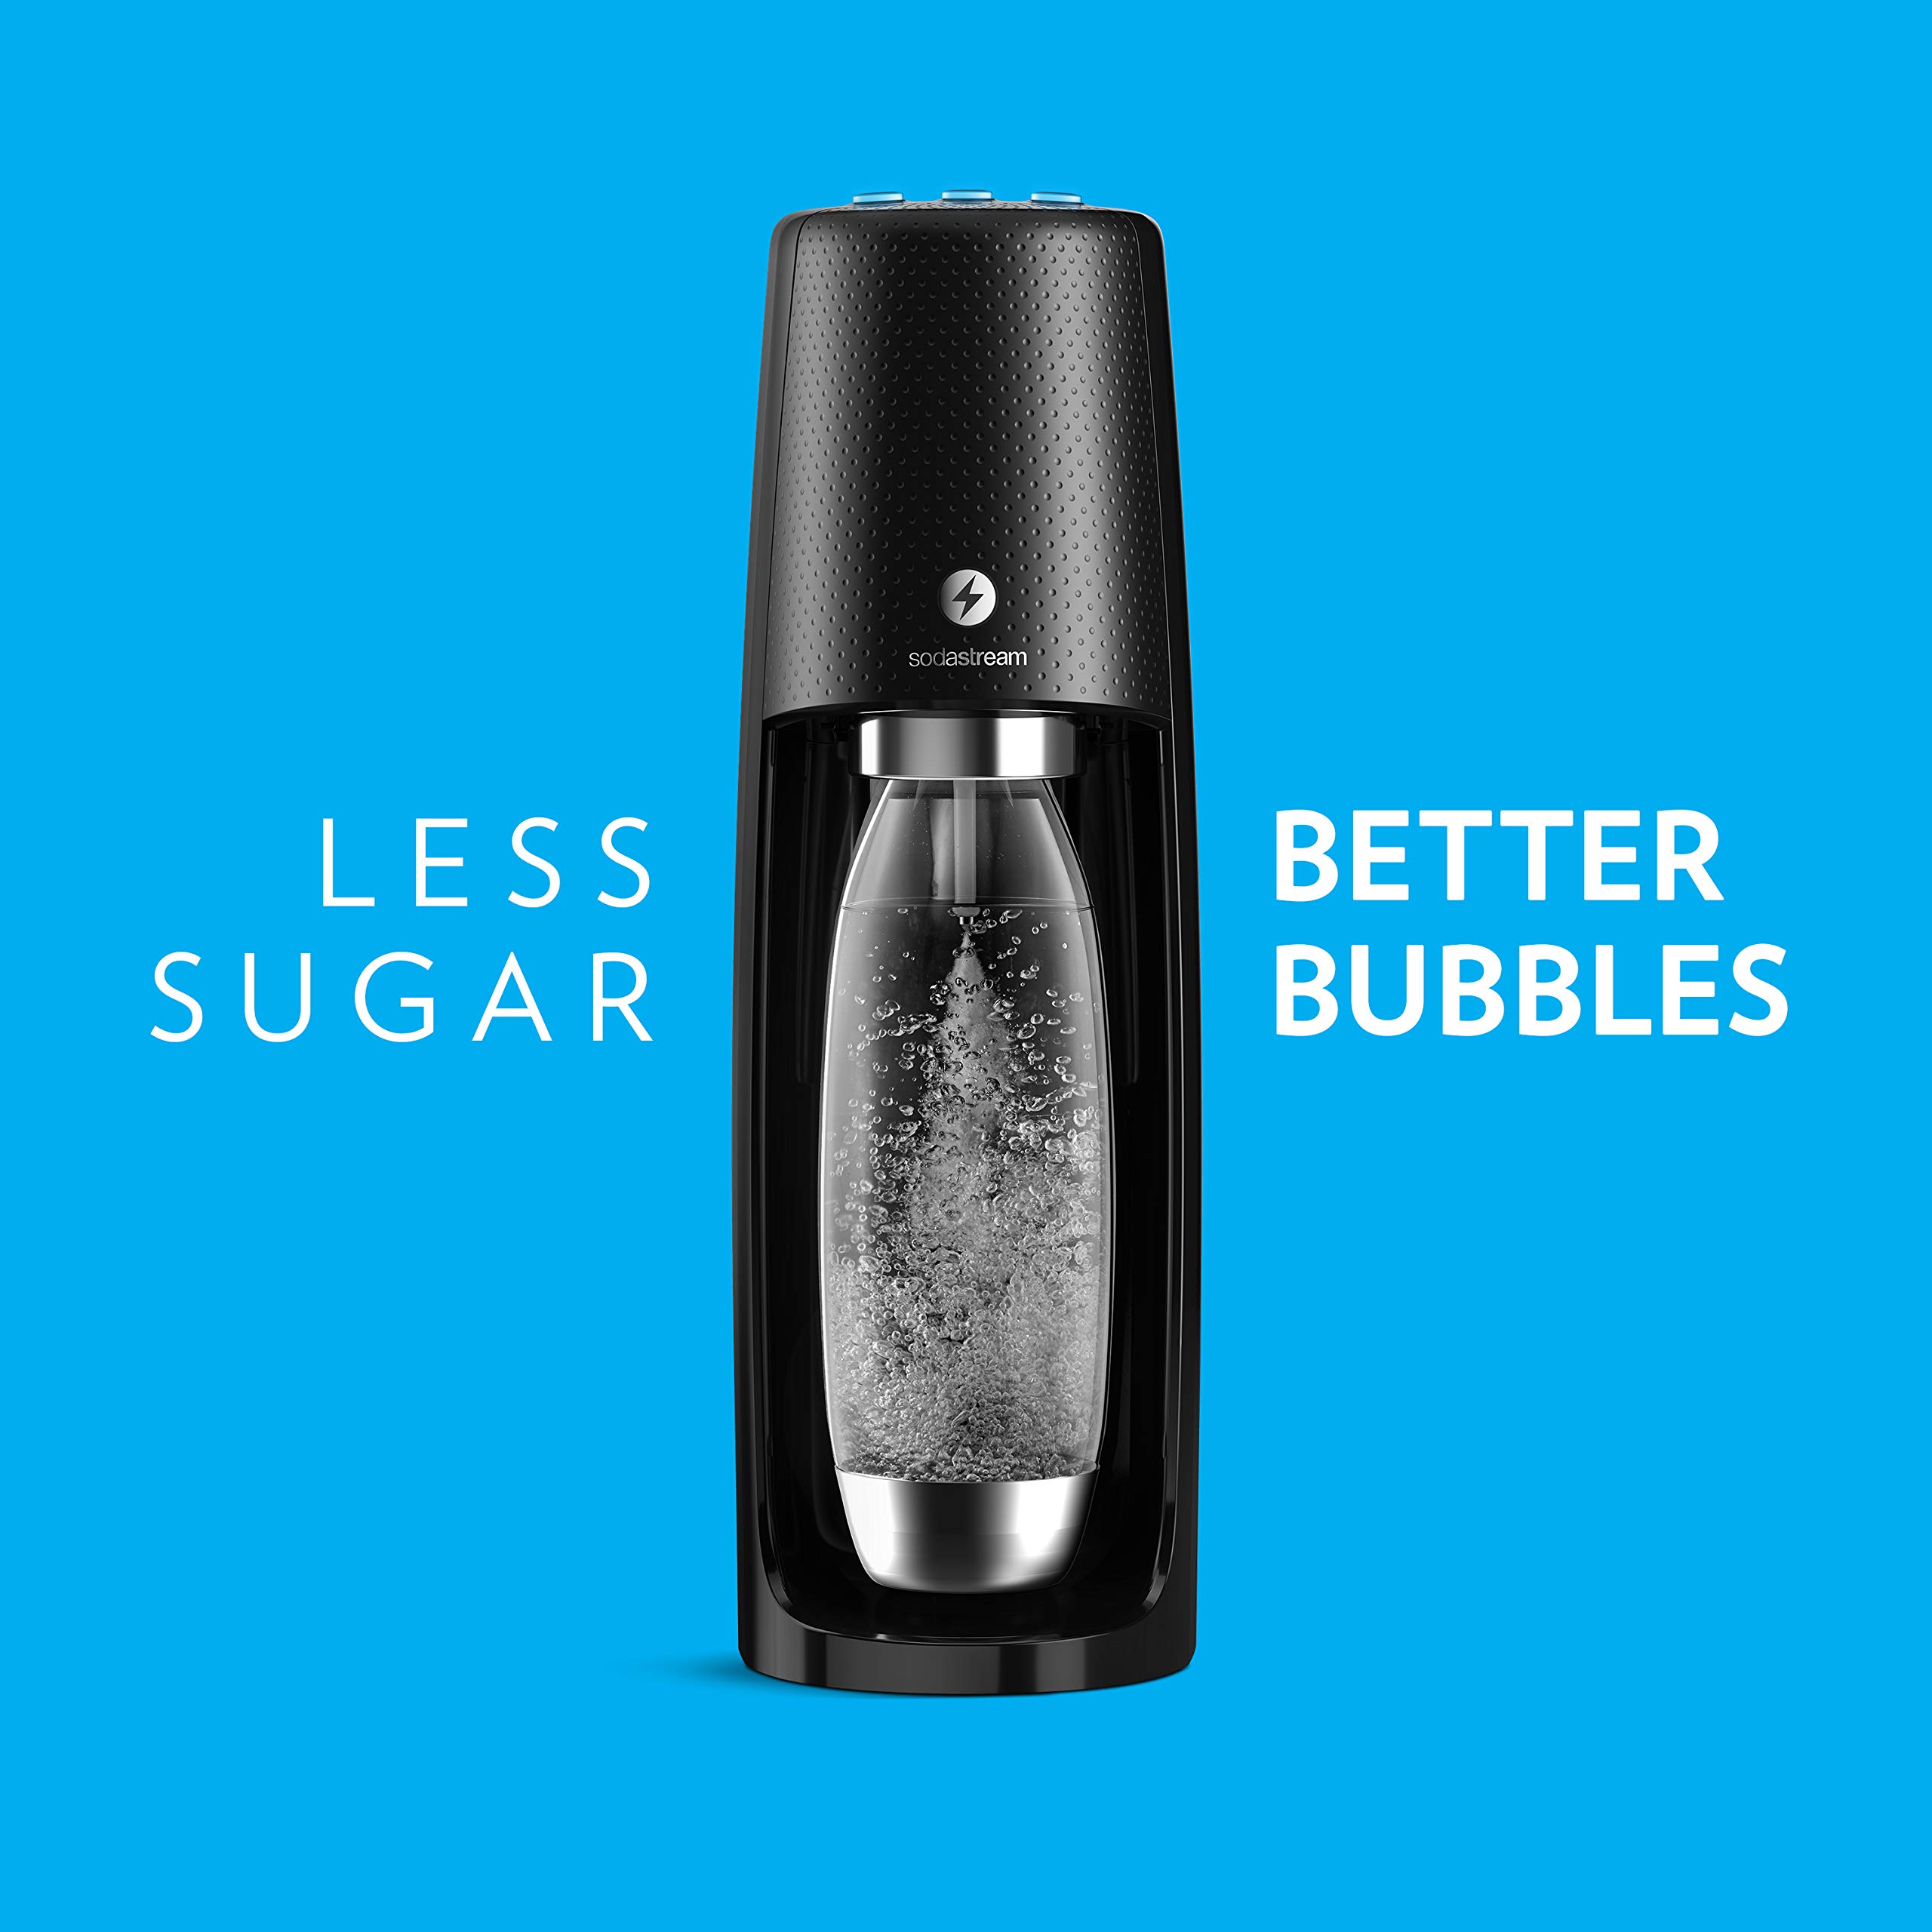 SodaStream Fizzi One Touch Sparkling Water Maker Bundle (Black) with CO2, BPA free Bottles, and 0 Calorie Fruit Drops Flavors